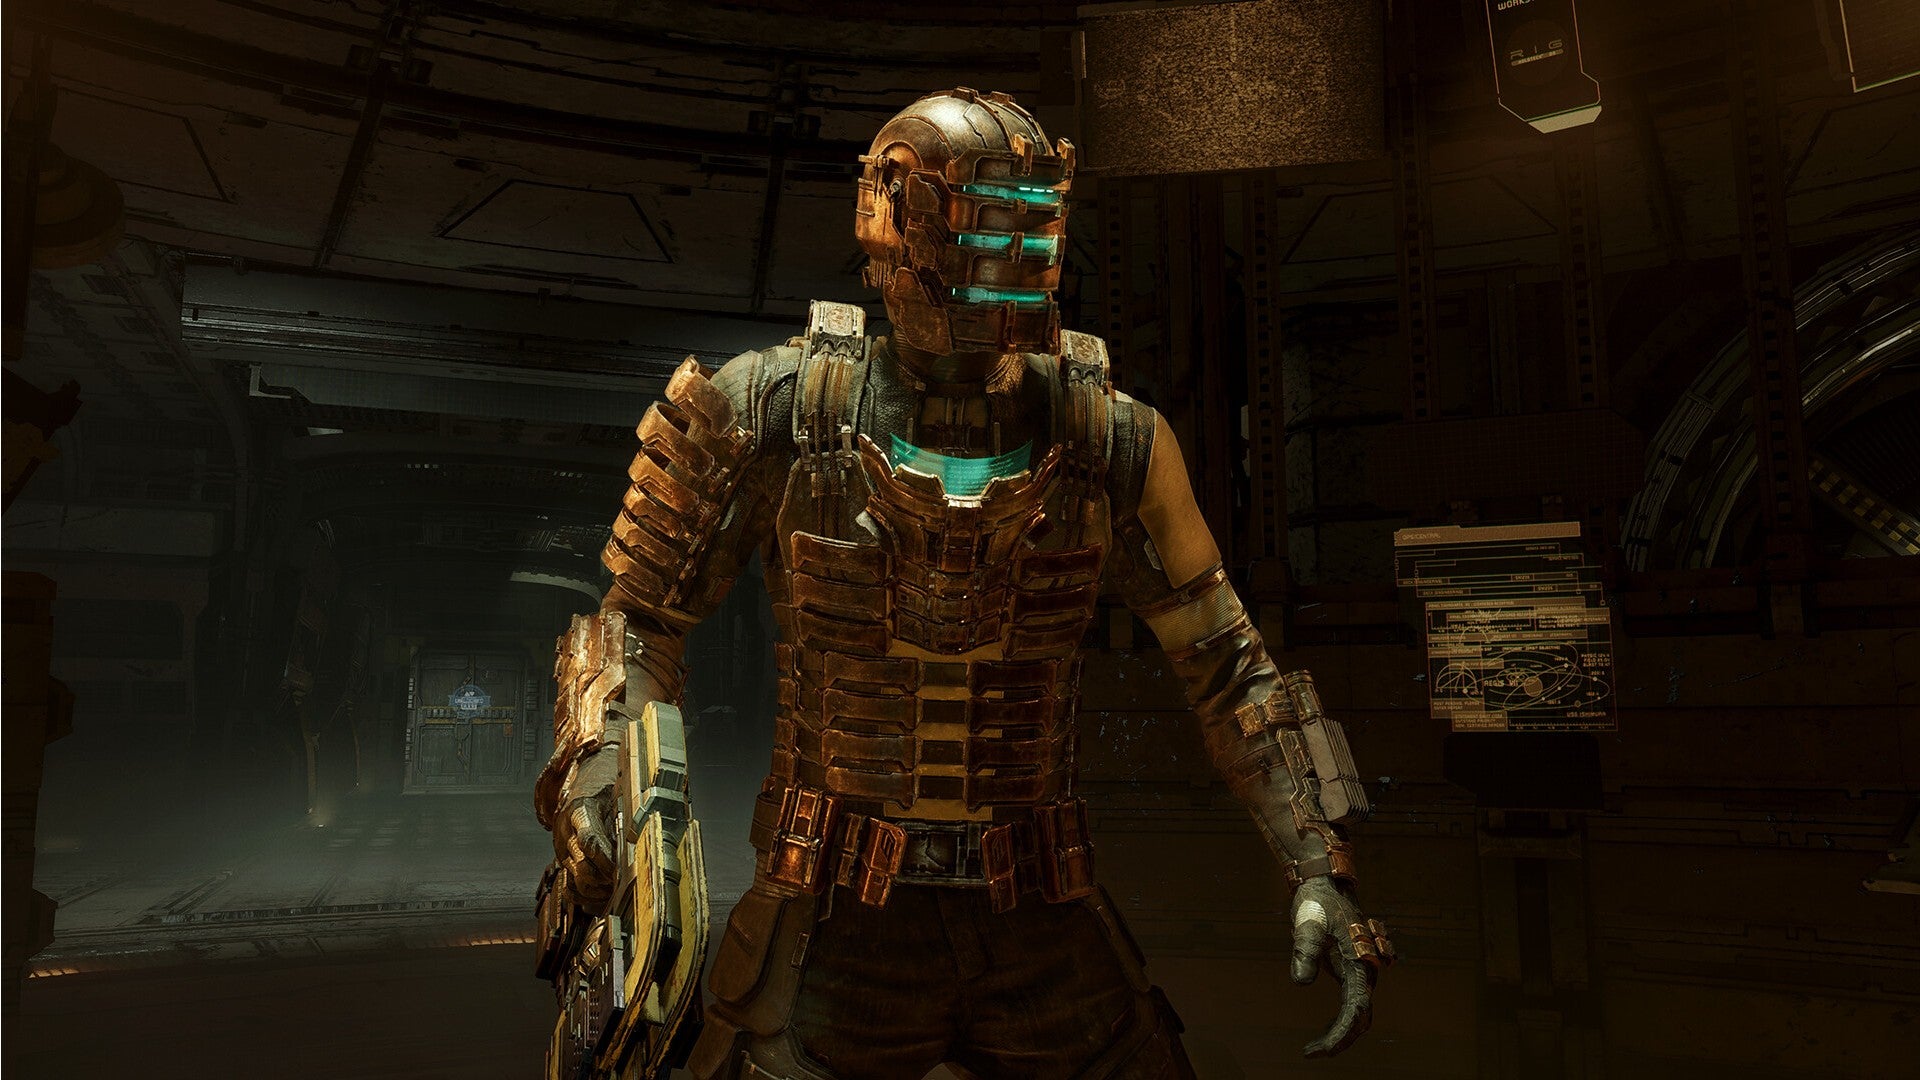 Dead Space remake image showing Isaac Clarke wearing his armor and helmet, wielding a Plasma Cutter.